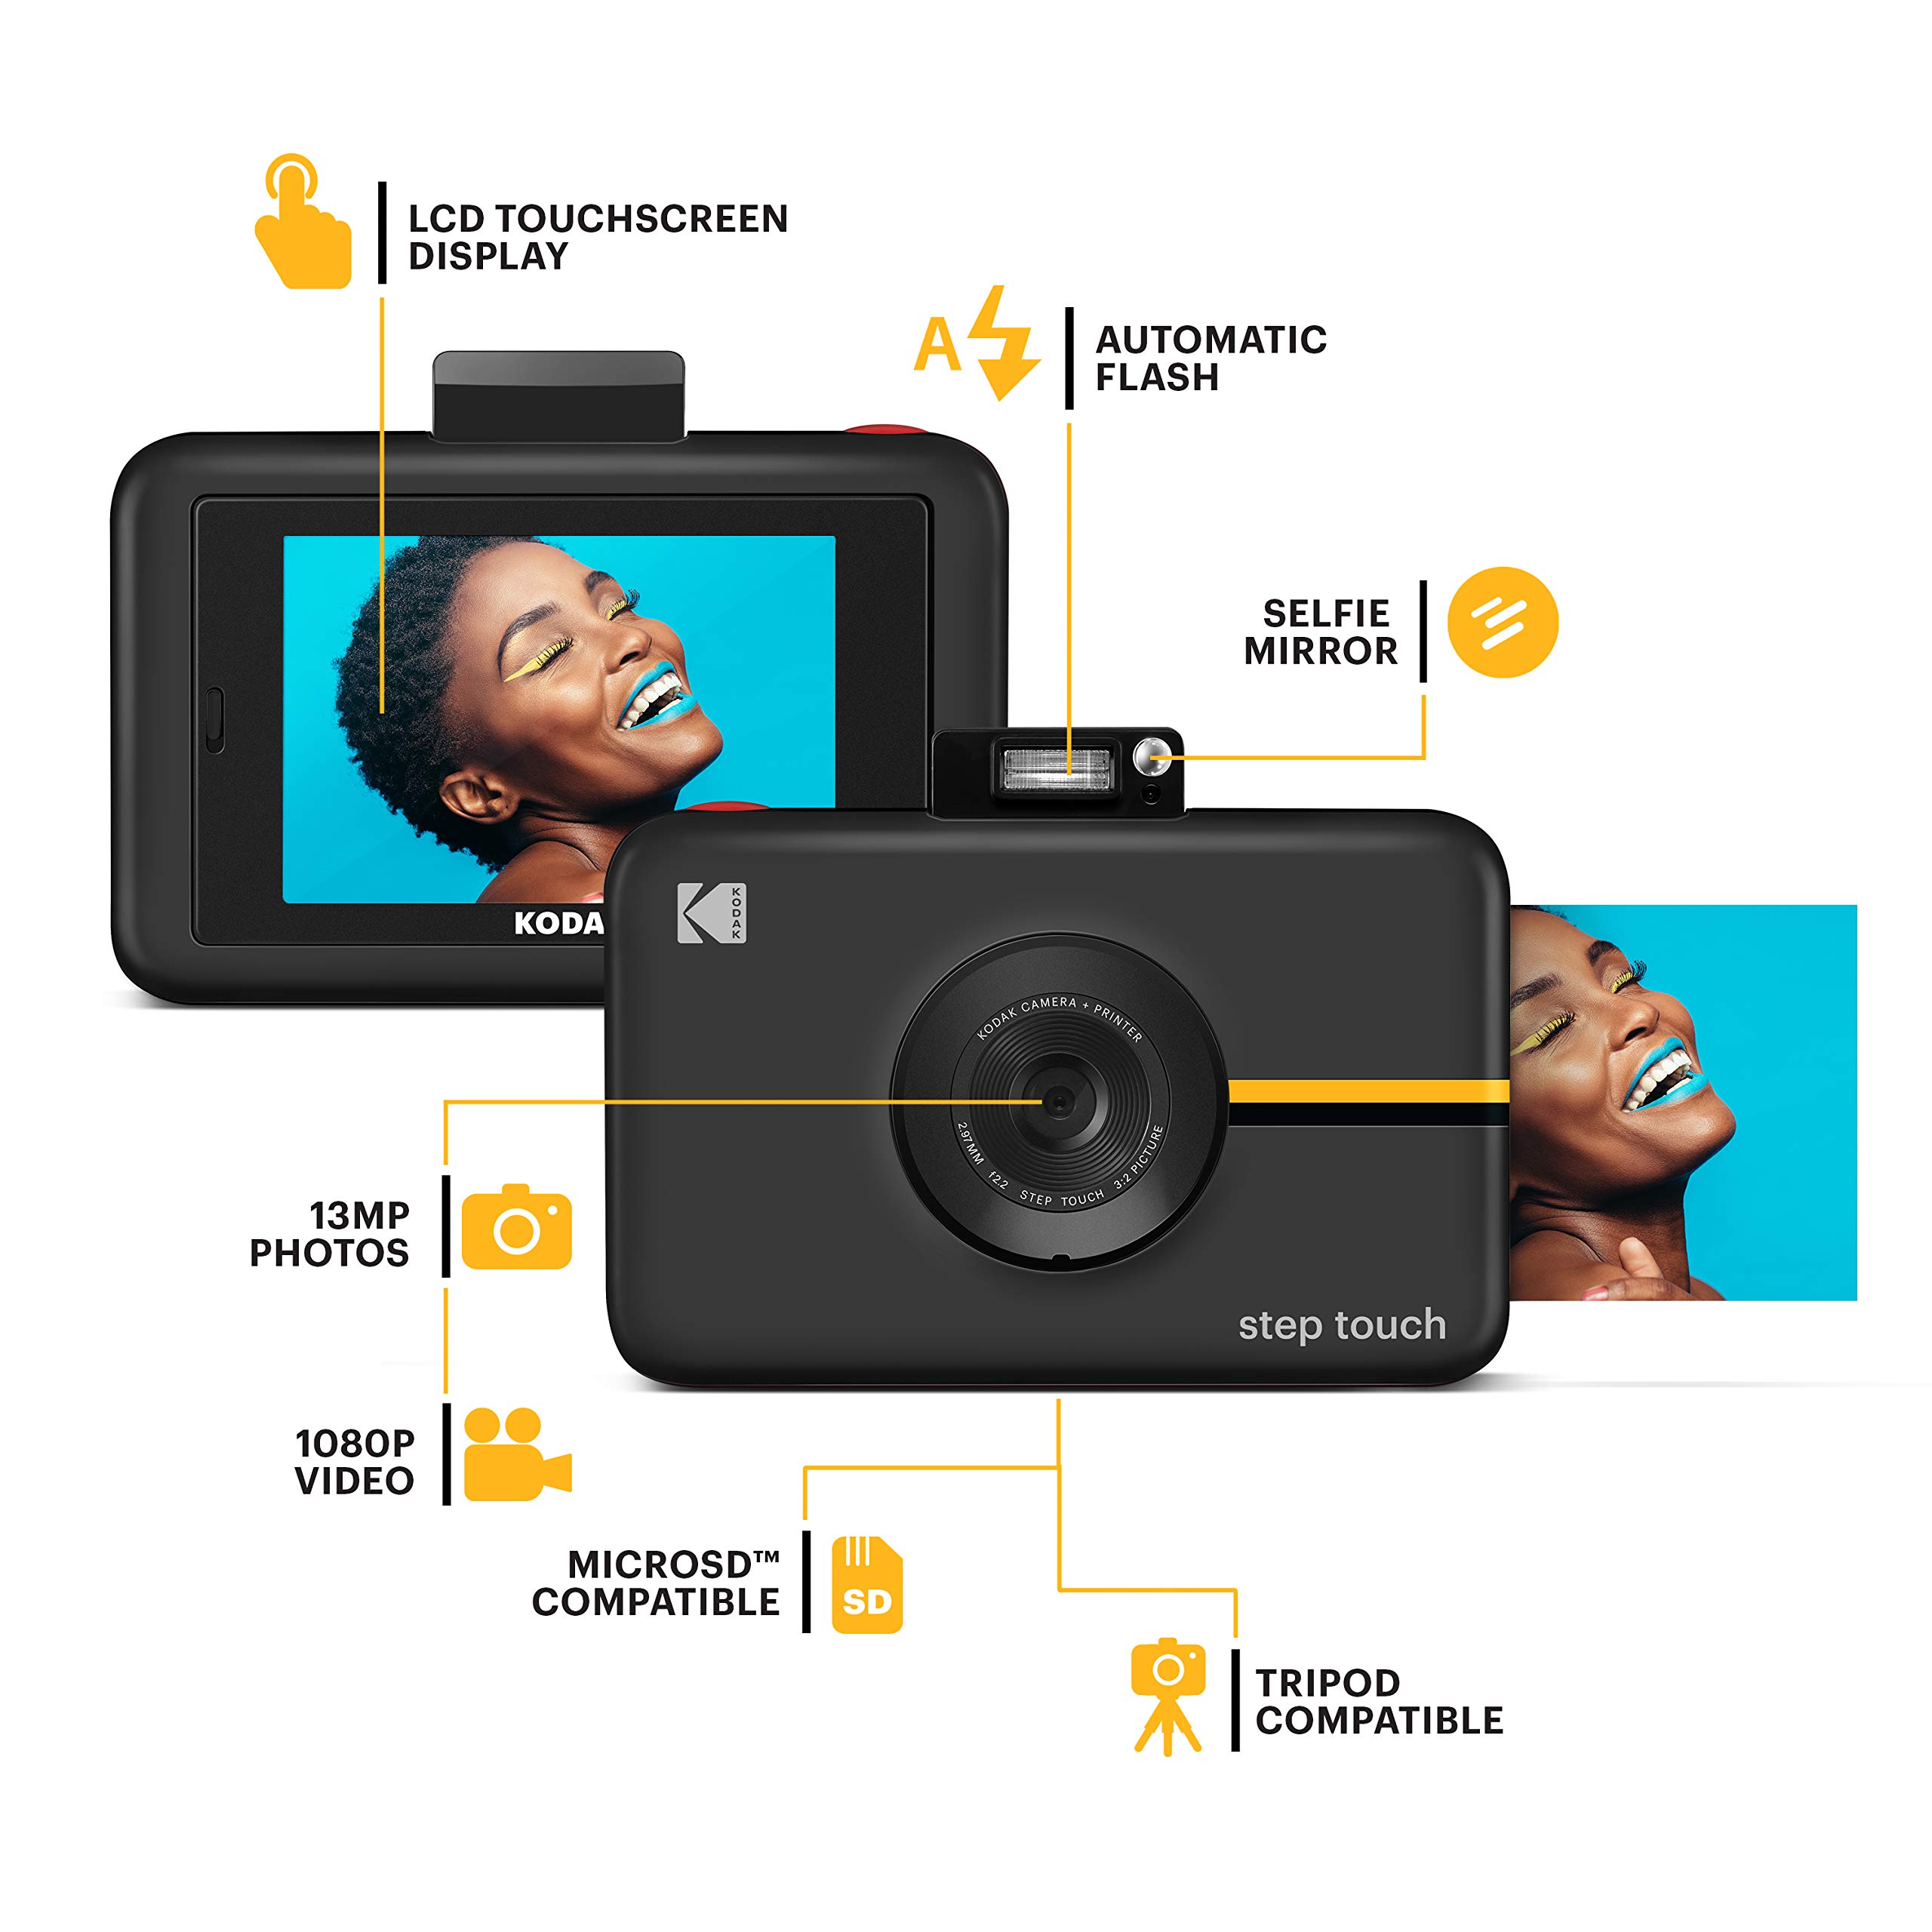 Kodak Step Touch Instant Camera with 3.5” LCD Touchscreen Display,13MP 1080p HD Video (Black) Starter Bundle